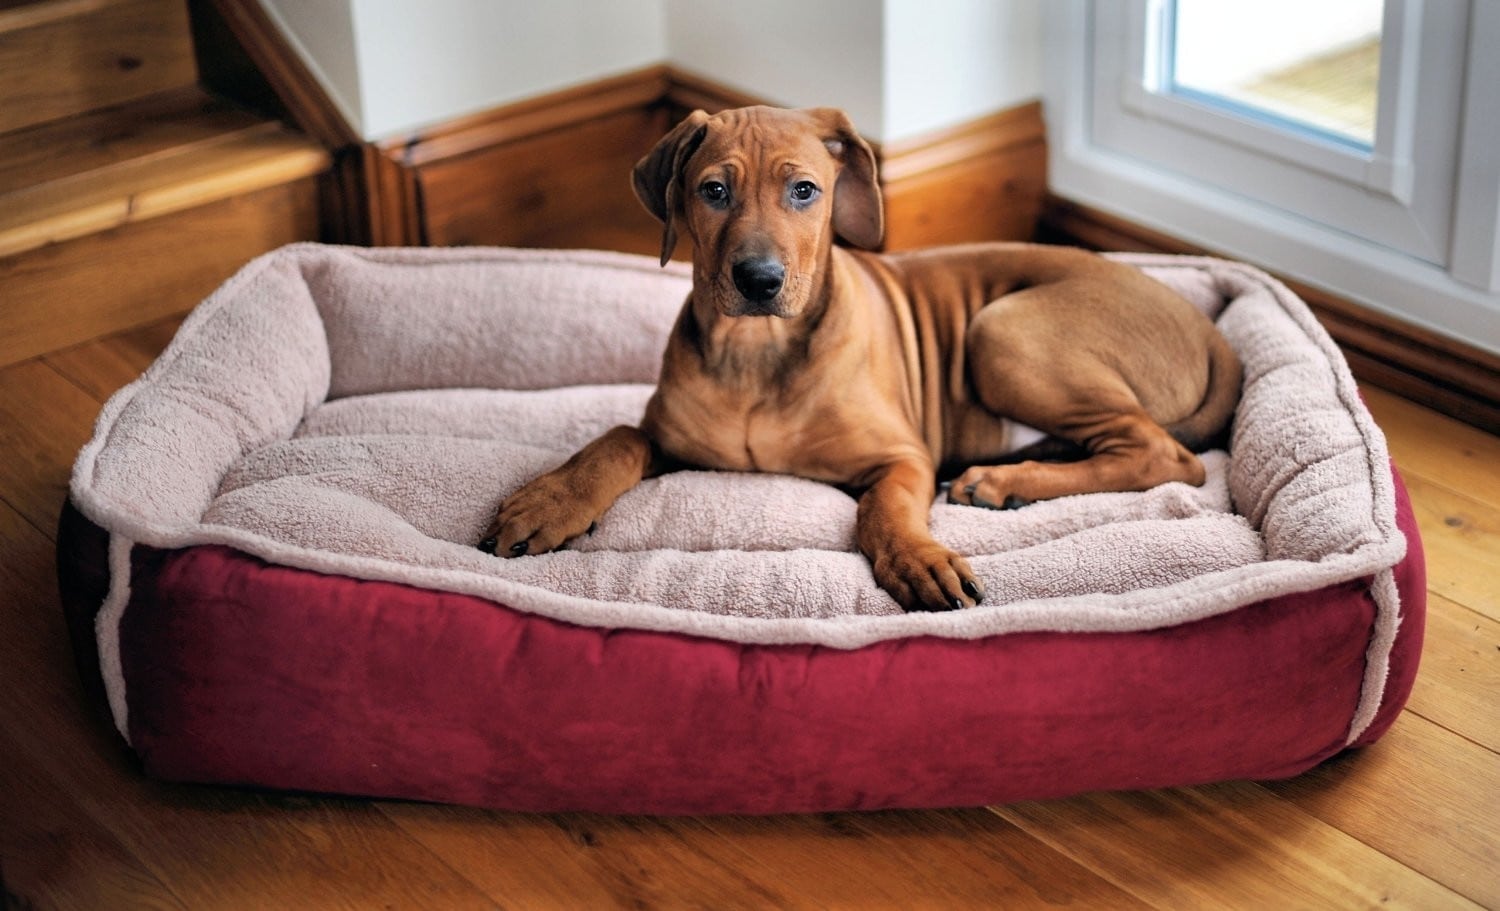 indestructible dog top for heavy duty welcome the best orthopedic beds end tables made into review puppyurl mission furniture quirky bedside cabinets shaped living room layout